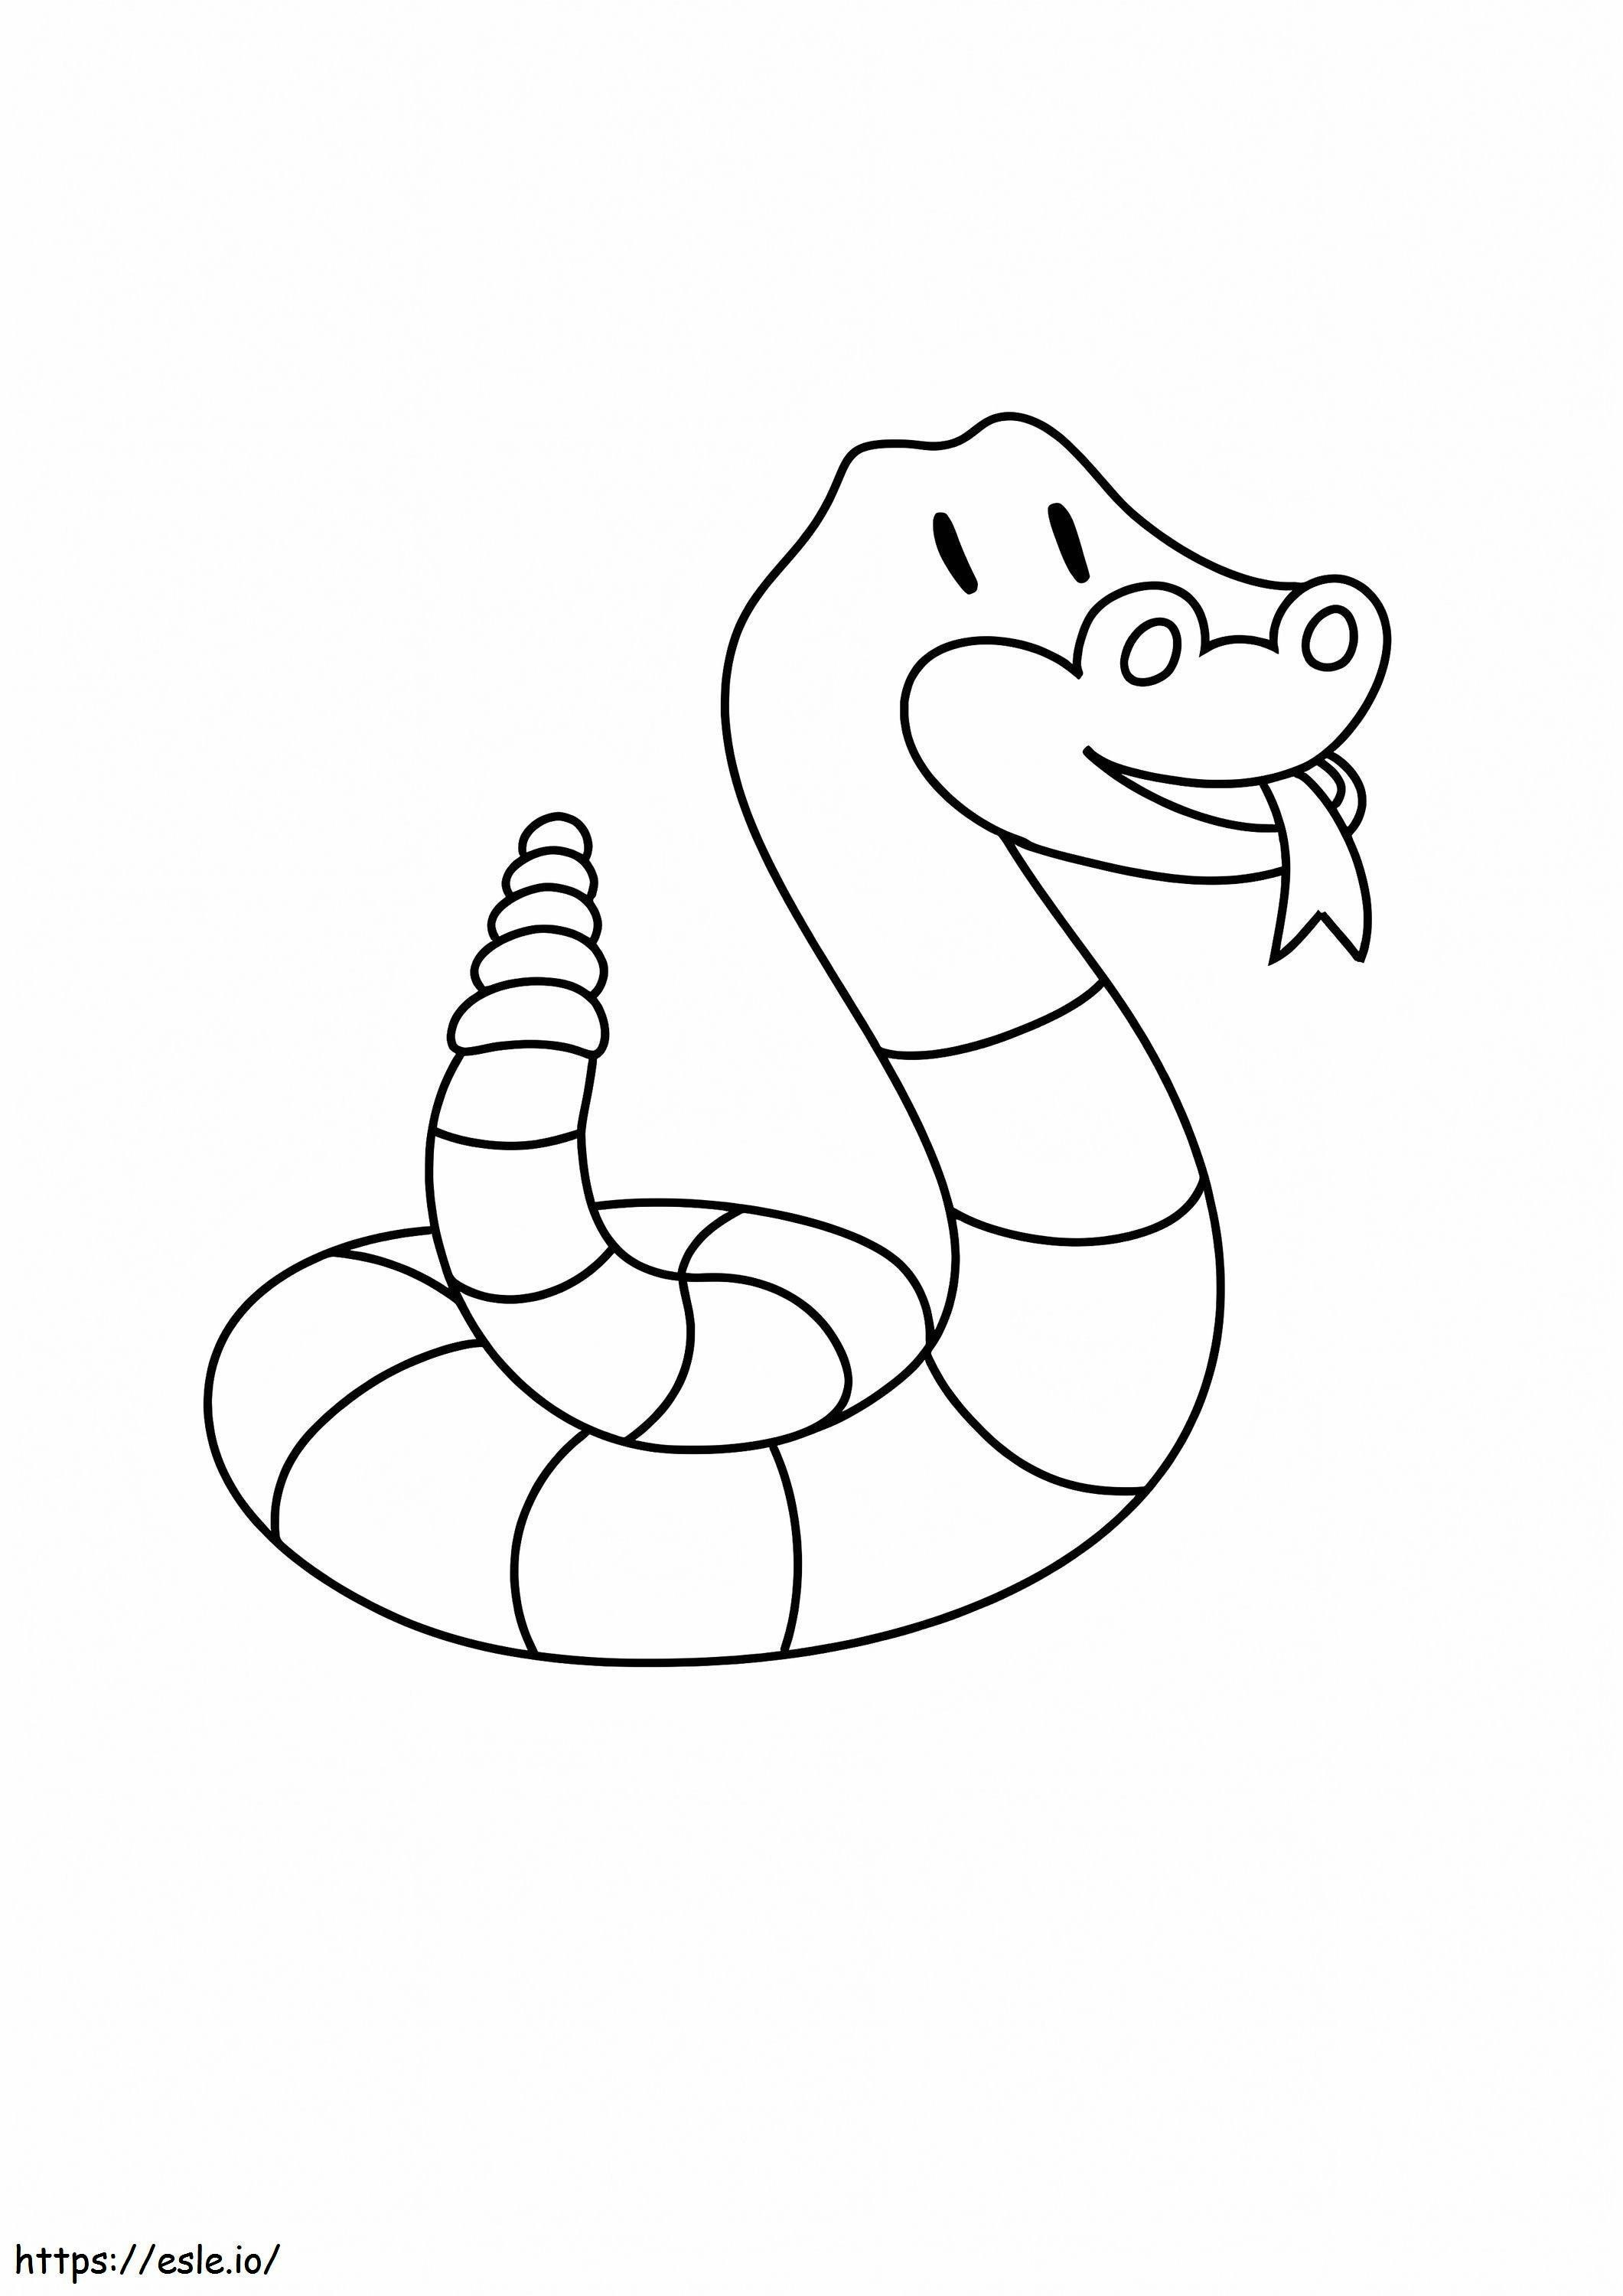 Funny Rattlesnake coloring page